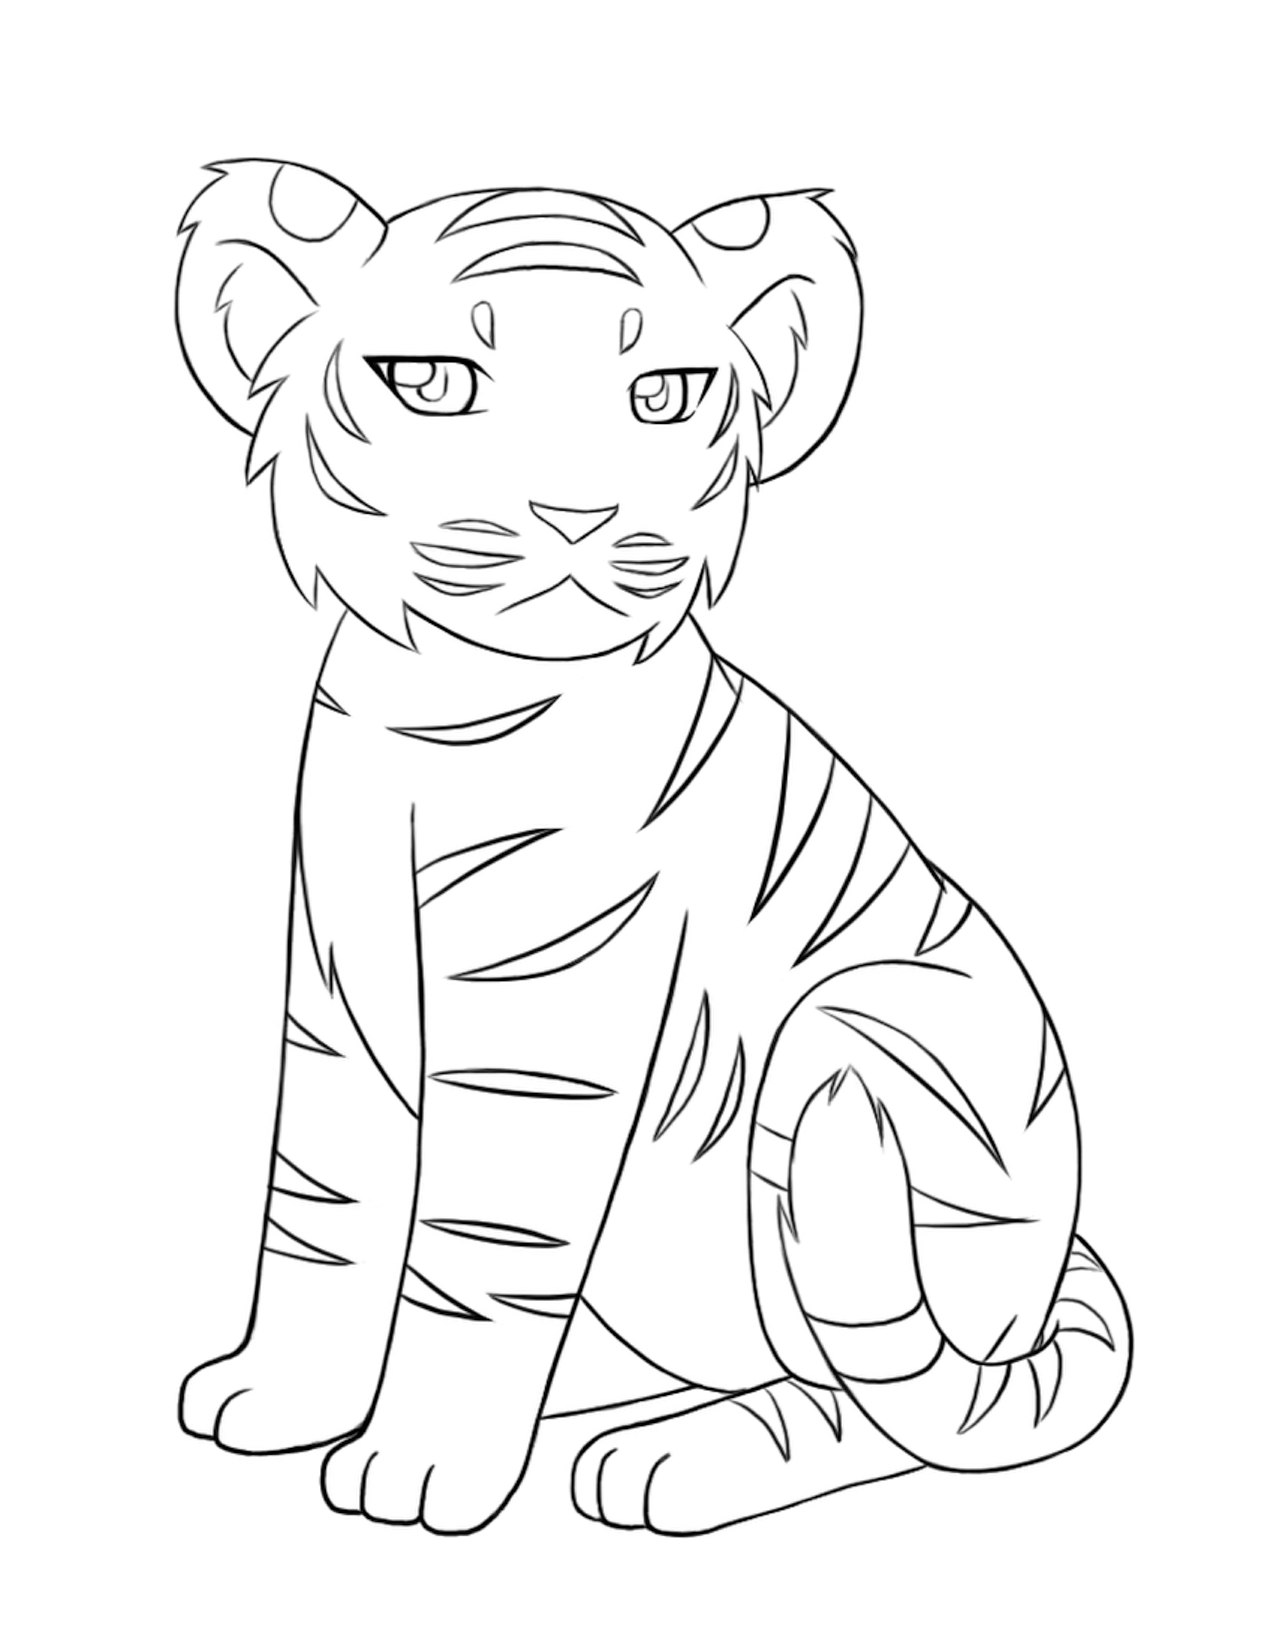 tiger coloring book pages cute baby tiger coloring page wecoloringpagecom coloring book pages tiger 